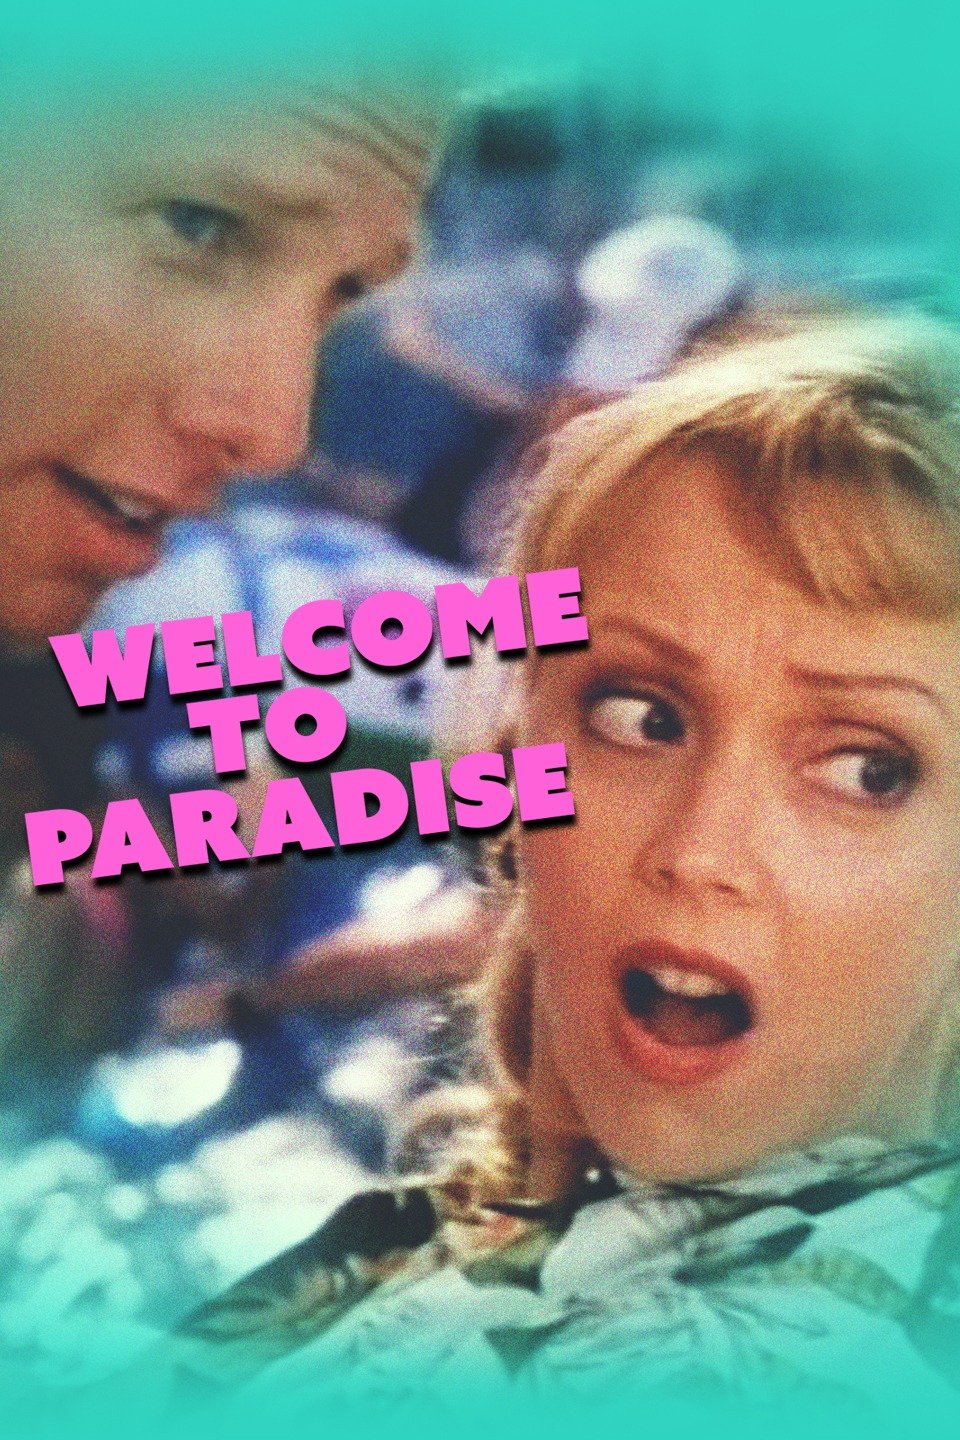 40 Best Photos Welcome To Paradise Movie Soundtrack / Welcome To Paradise Vol I Italian Dream House 89 93 Vinyl Discogs